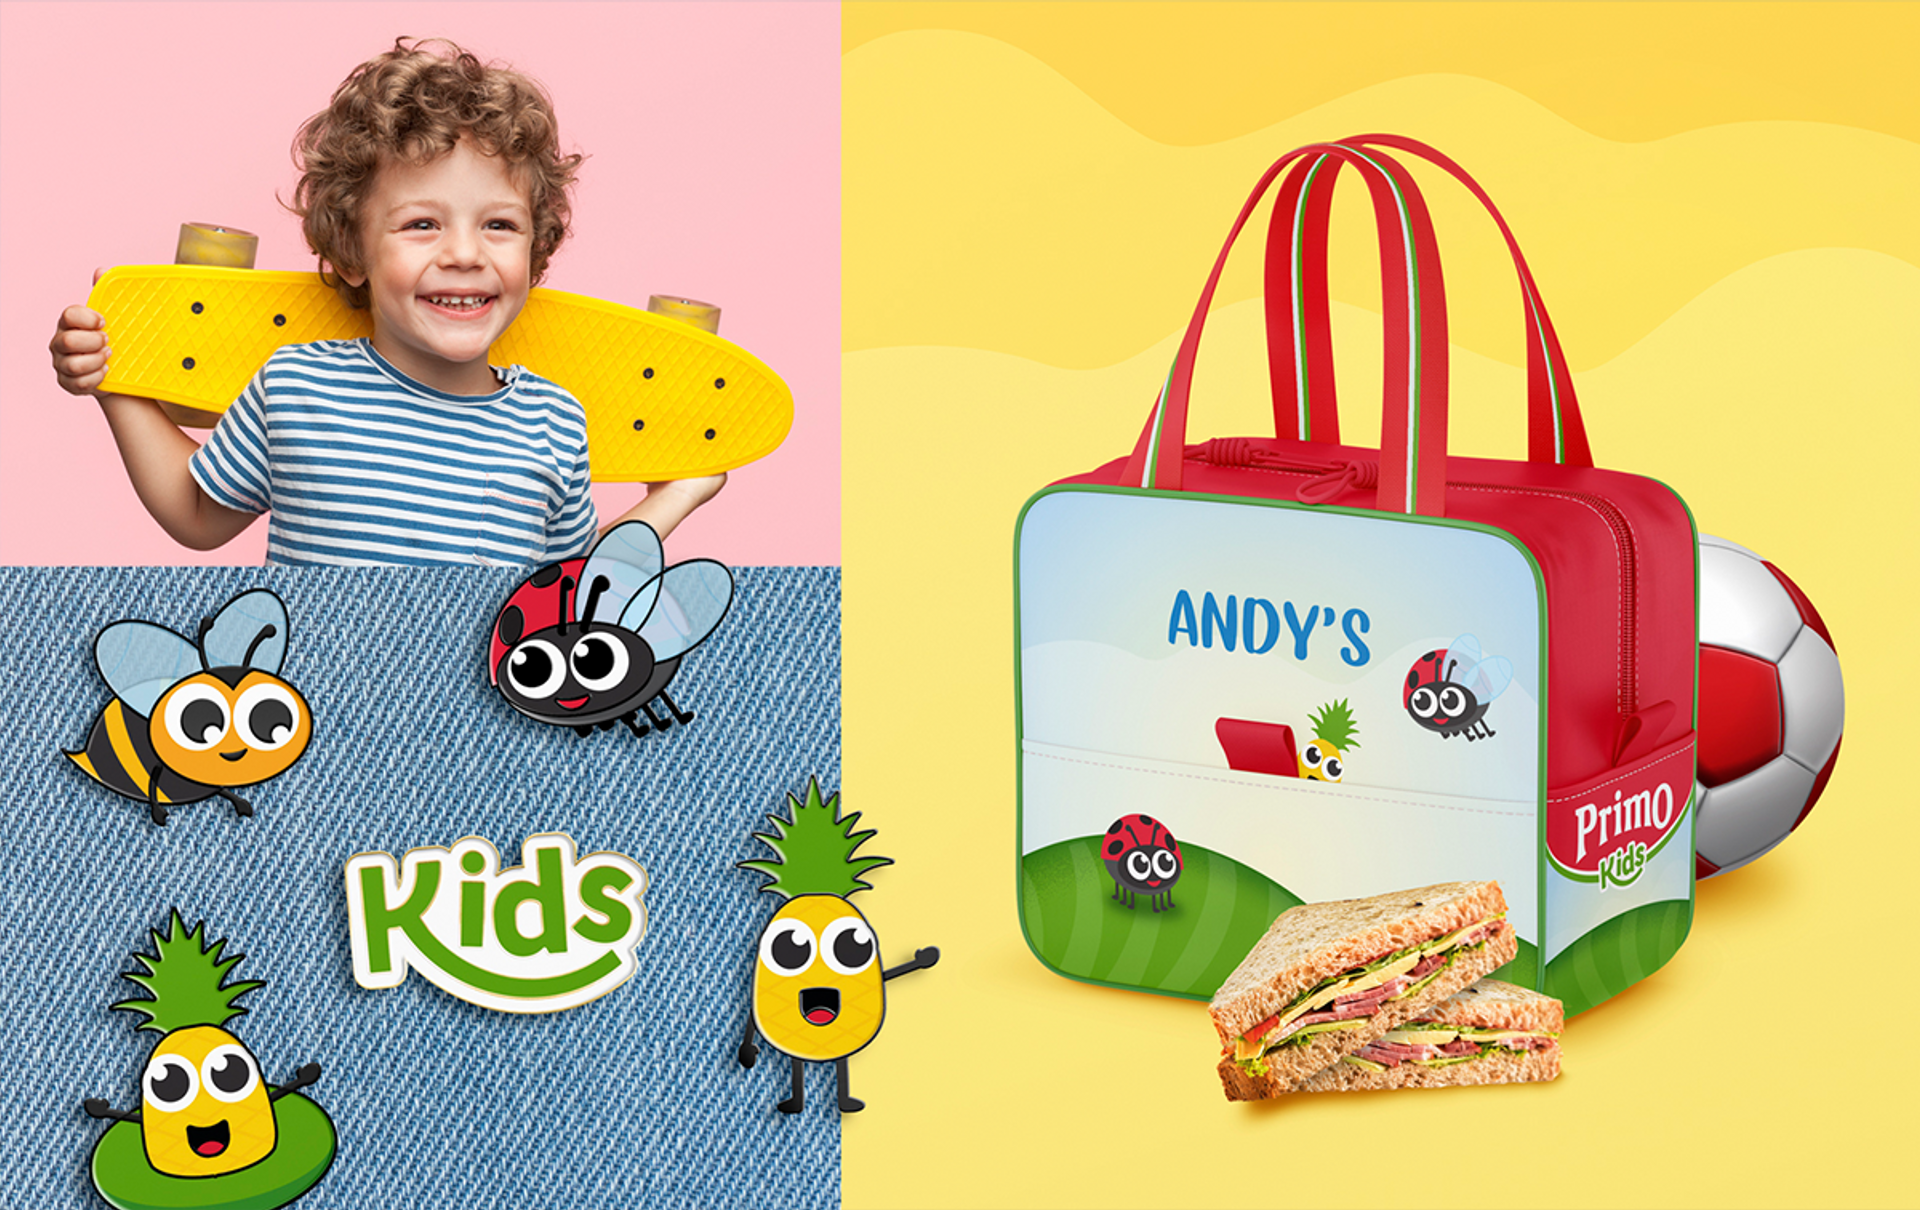 Collage of a child holding a skateboard, cartoon character pins on denim, and a kids lunchbox and soccer ball behind a sandwich for meat brand Primo